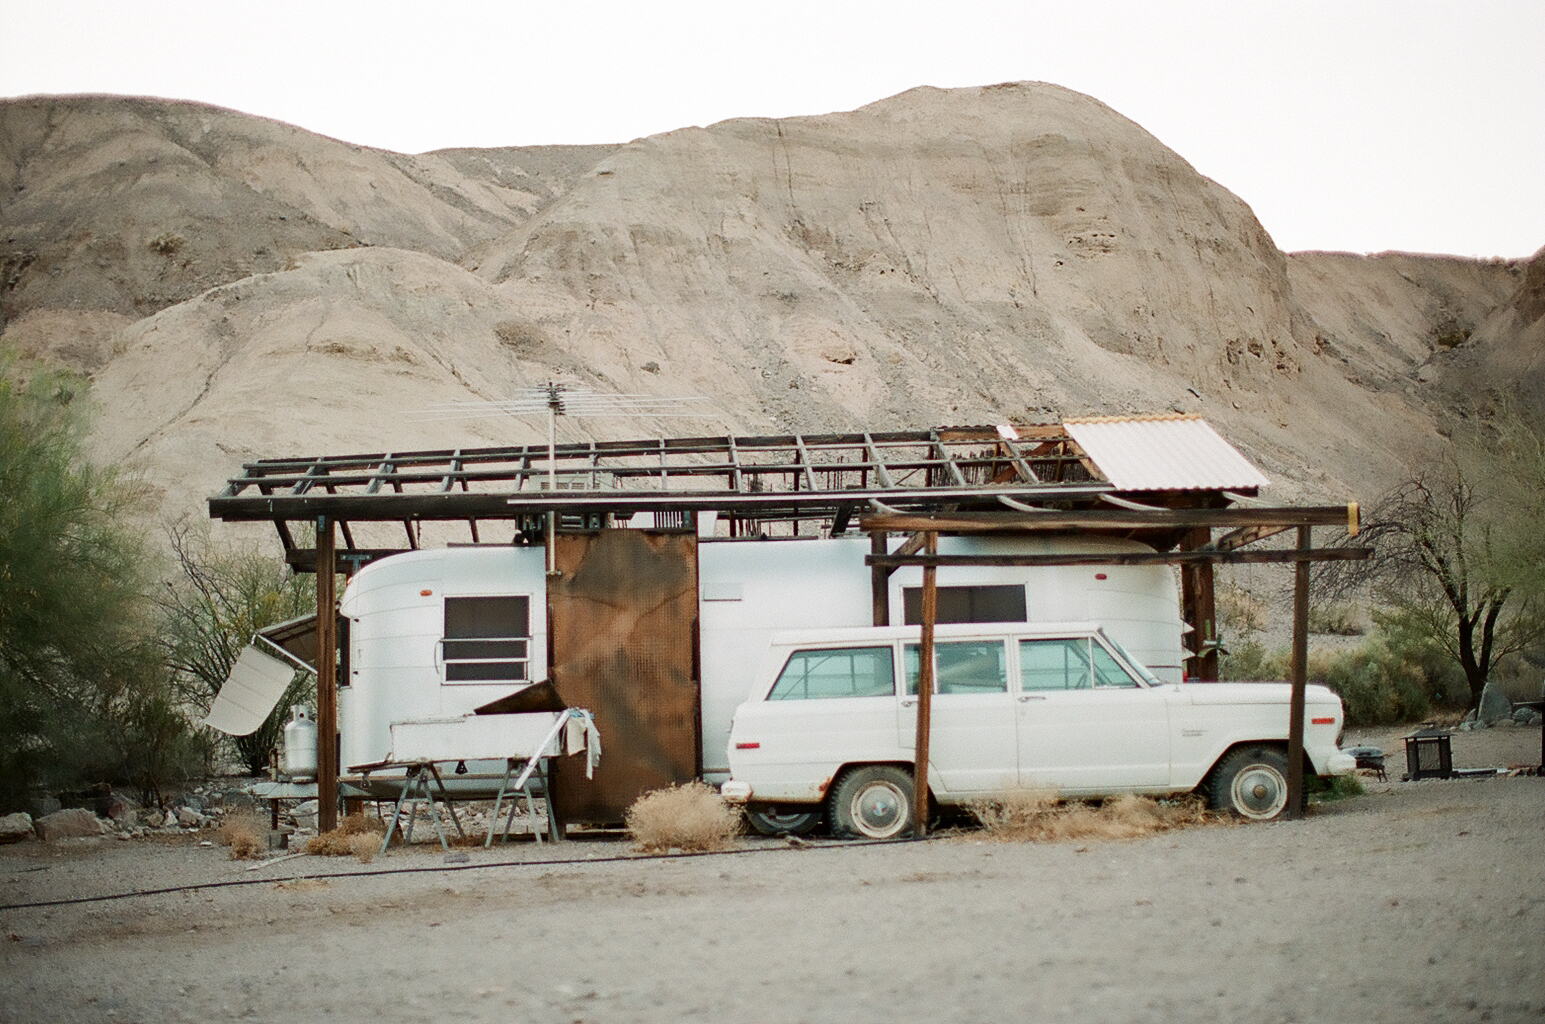 China Ranch in Death Valley